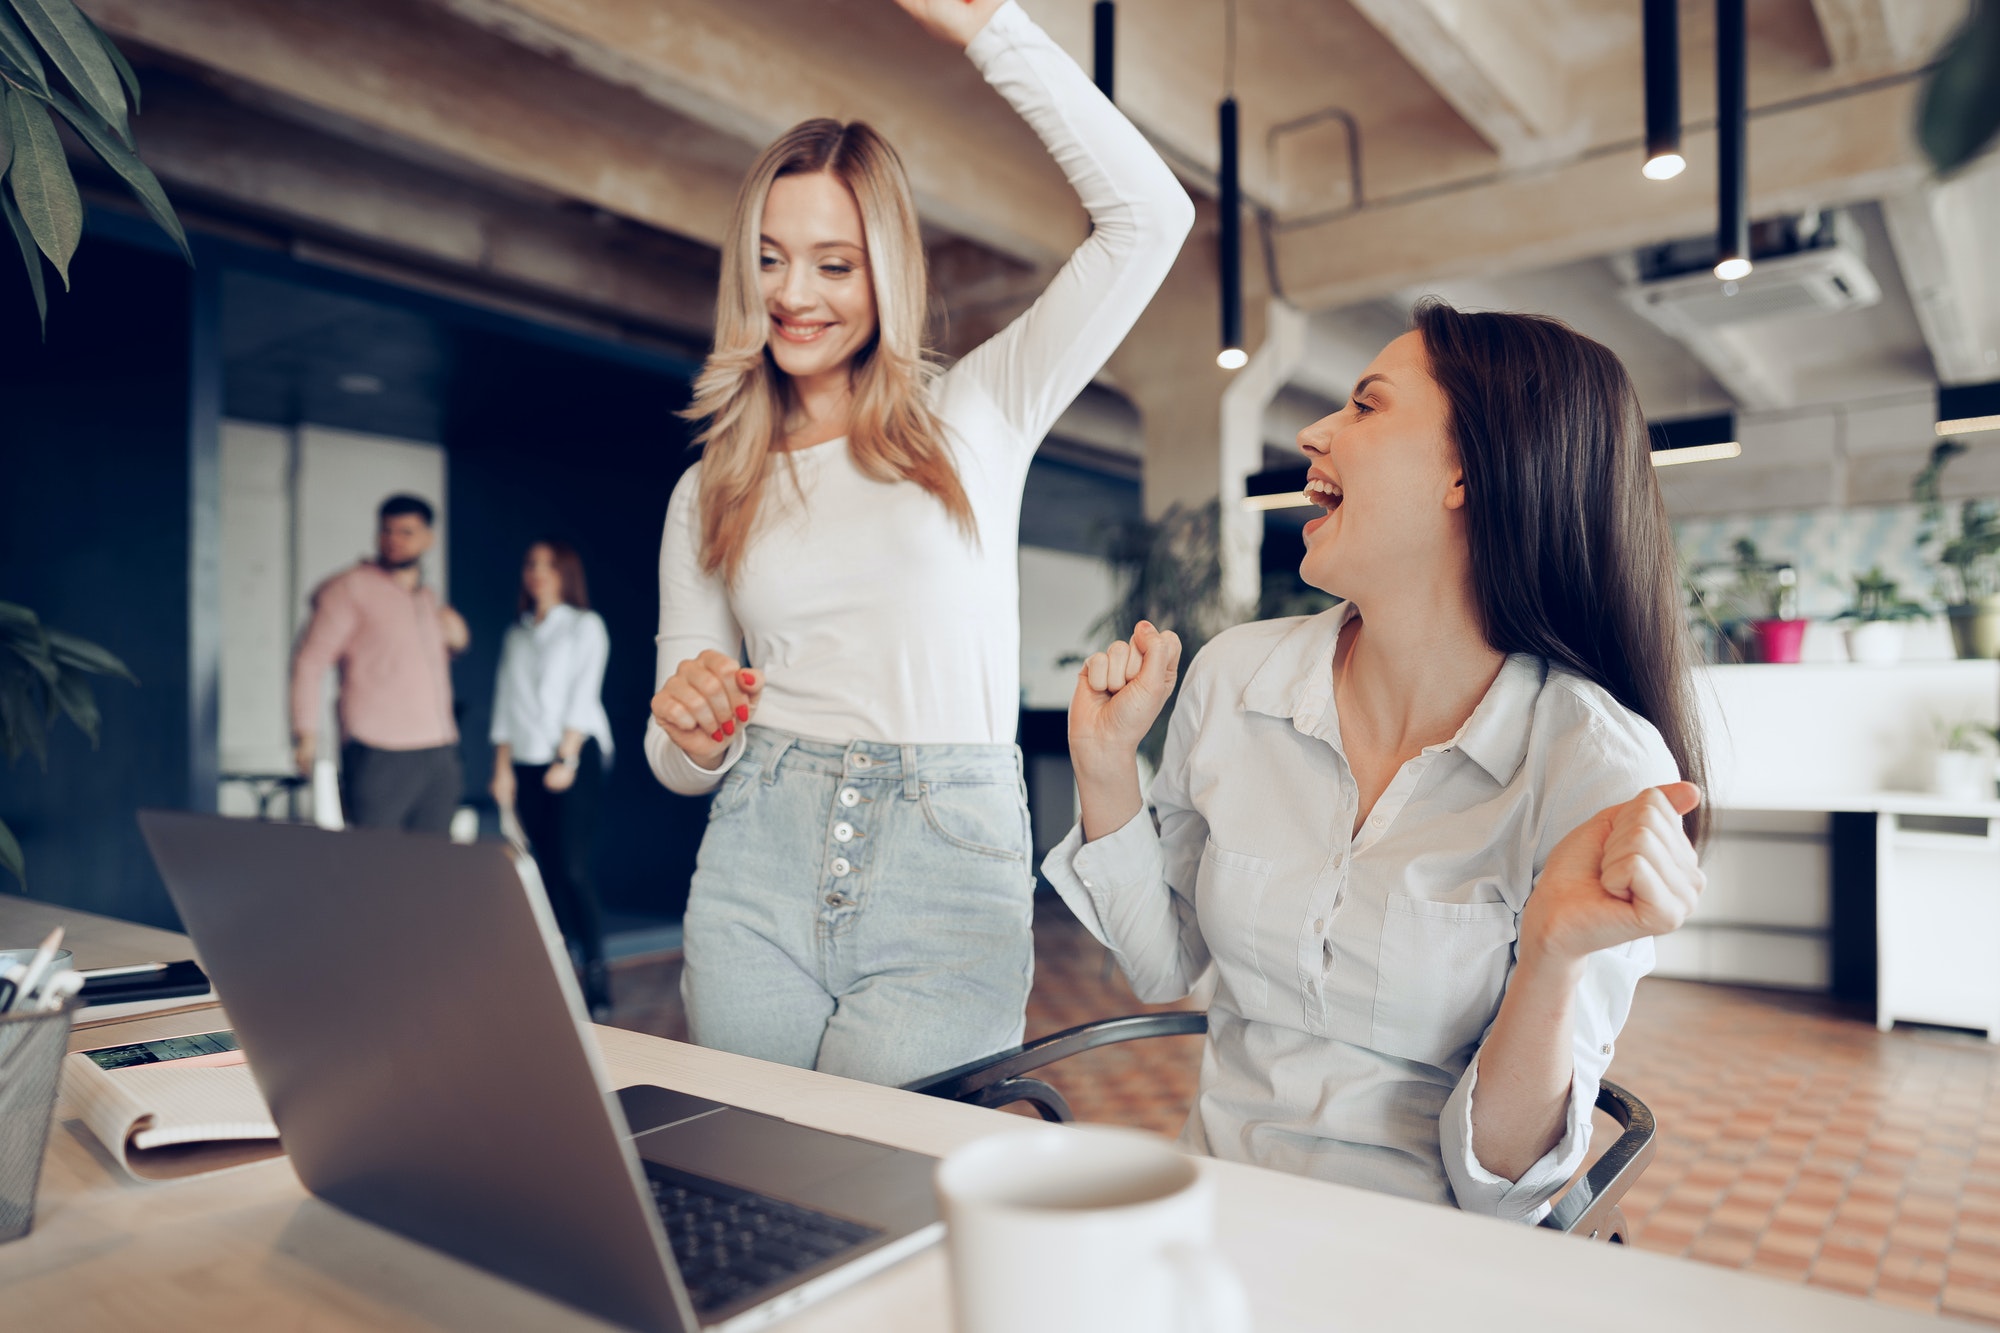 Two young happy businesswomen celebrating project success in office